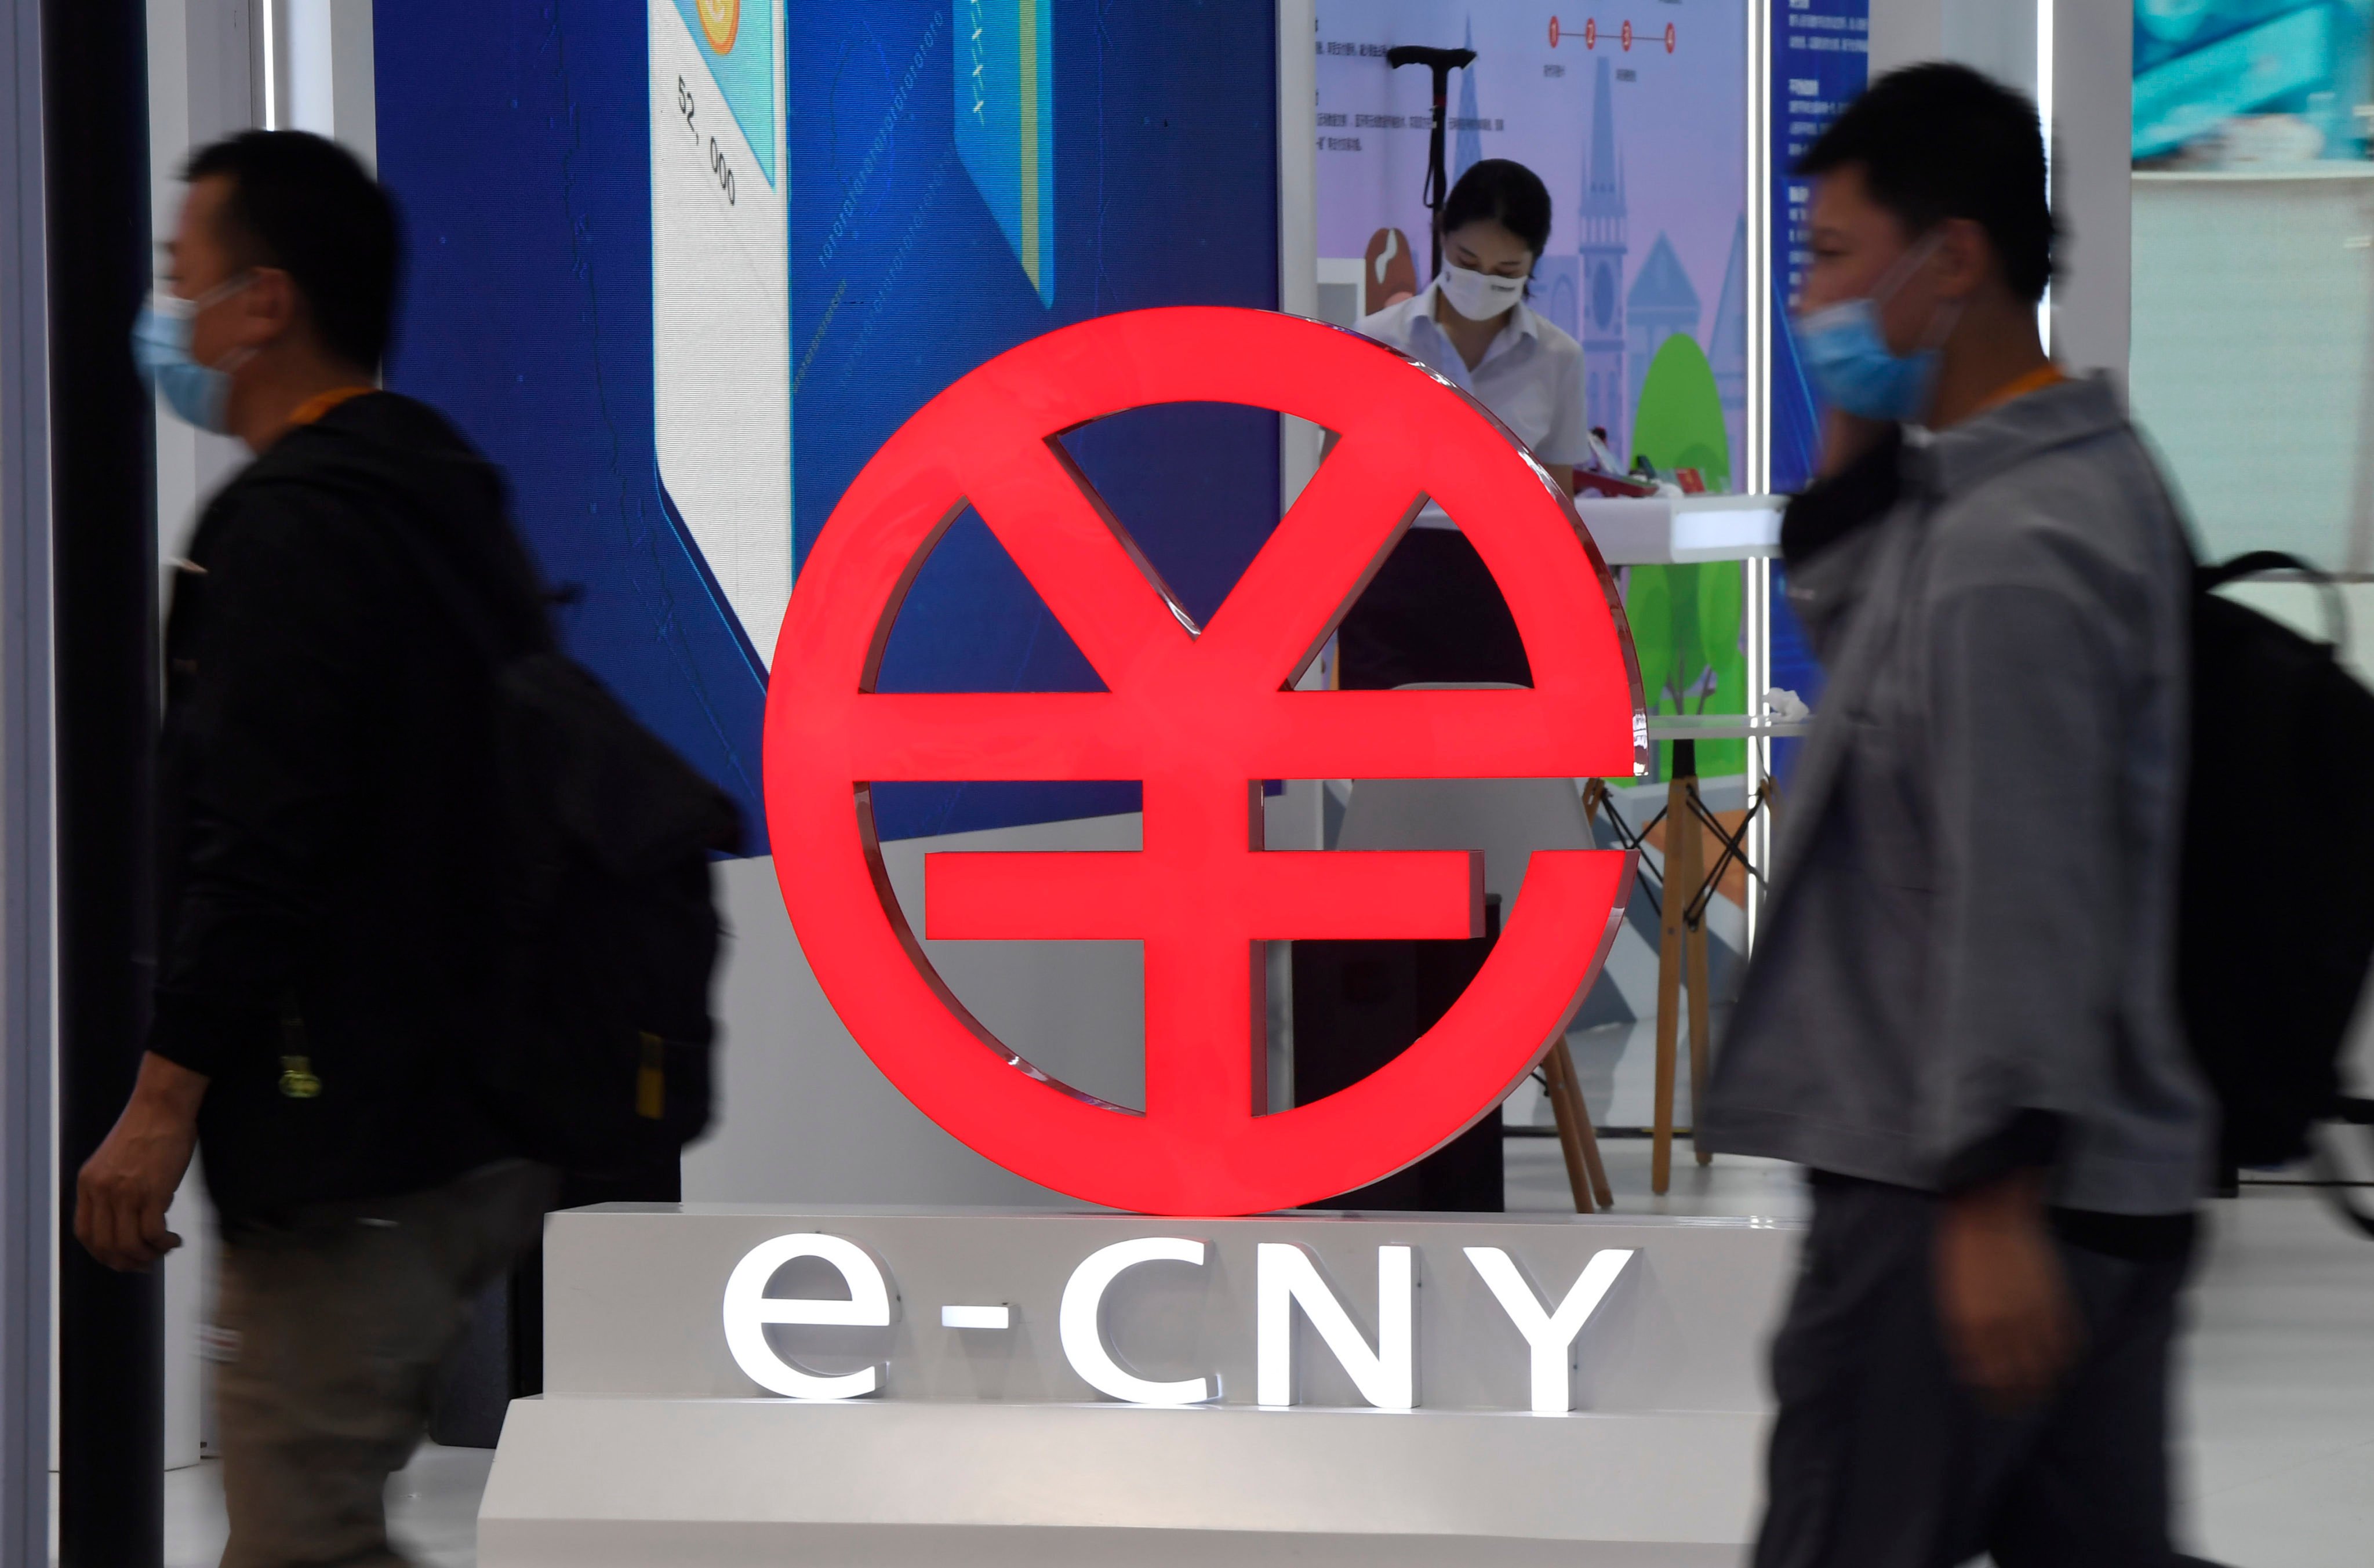 People walk past a digital yuan (e-CNY) sign during the 2021 China International Fair for Trade in Services (CIFTIS) in Beijing on September 5. Much of the CBDC dynamism is in Asia, and the principal focus is on China. Photo: Xinhua